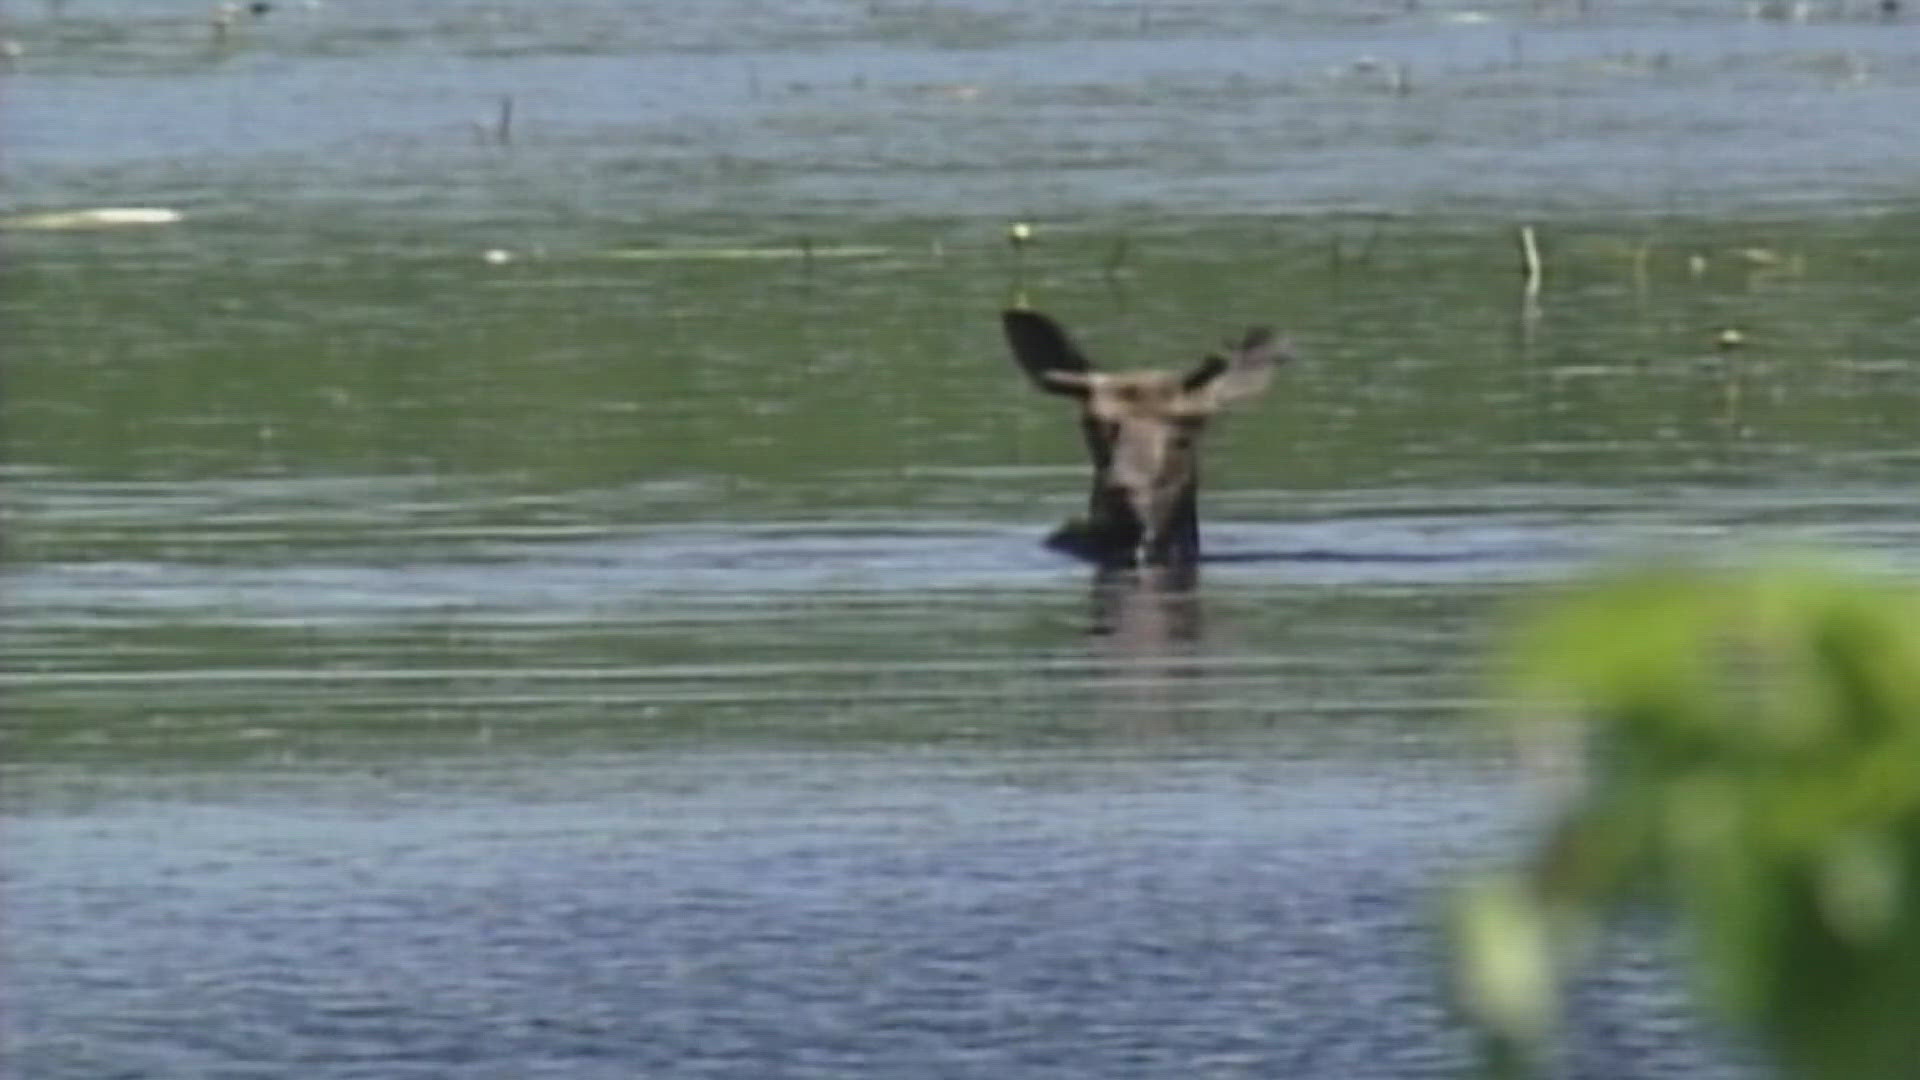 The deadline to apply for Maine's moose permit lottery is 11:59 p.m. on Wednesday. The drawing will happen in Fort Kent on June 15.